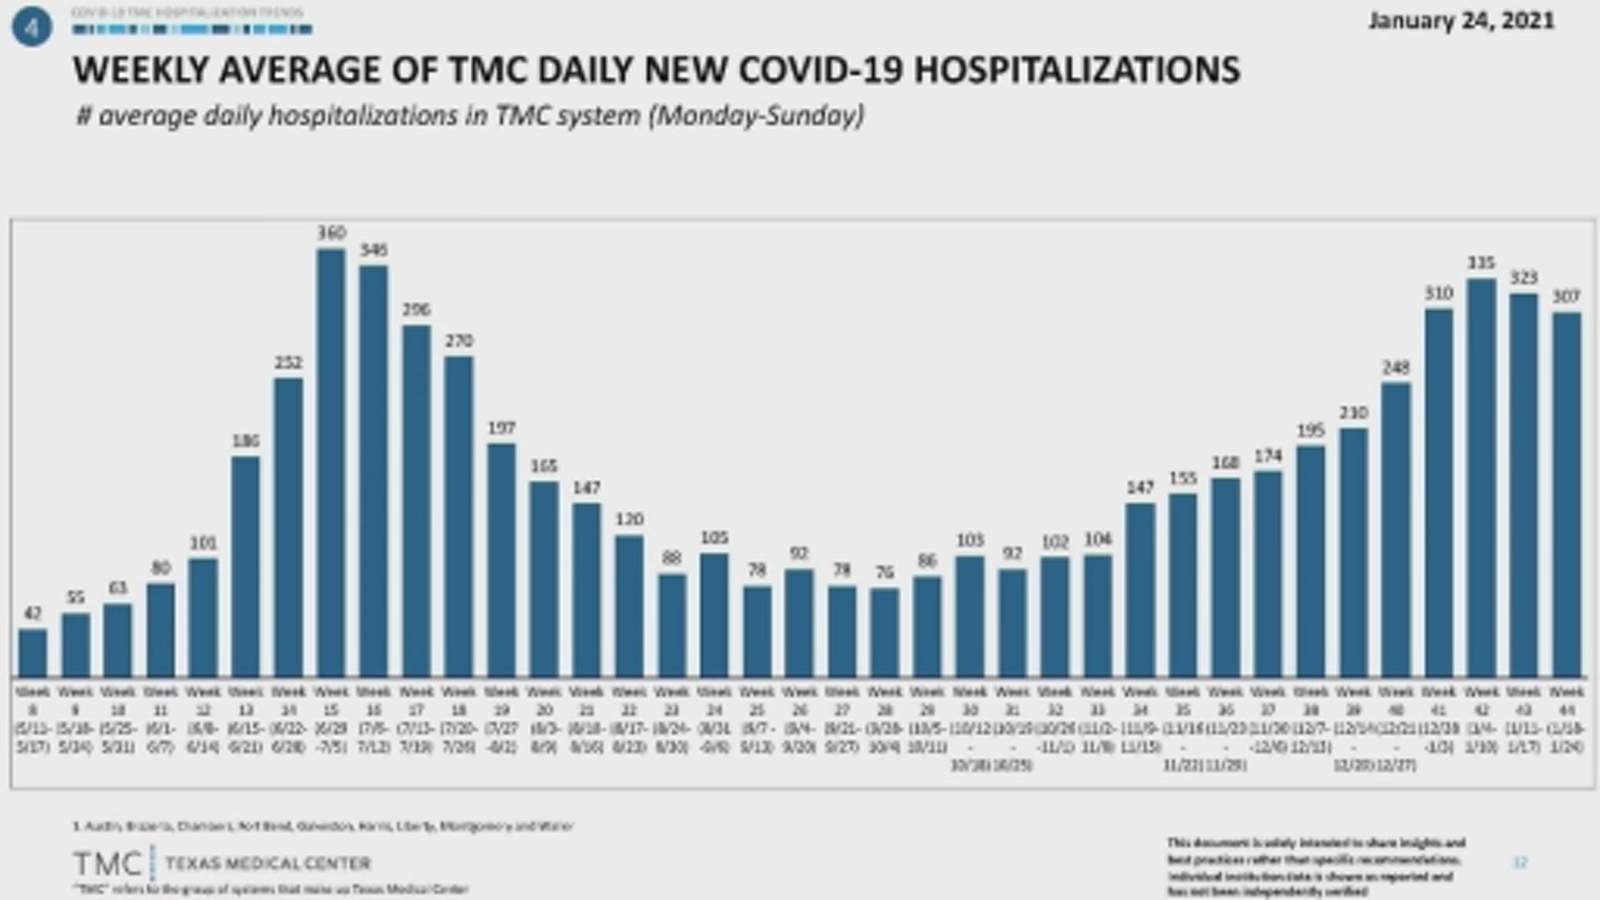 Concerns about COVID-19 hospitalizations in Texas Medical Center